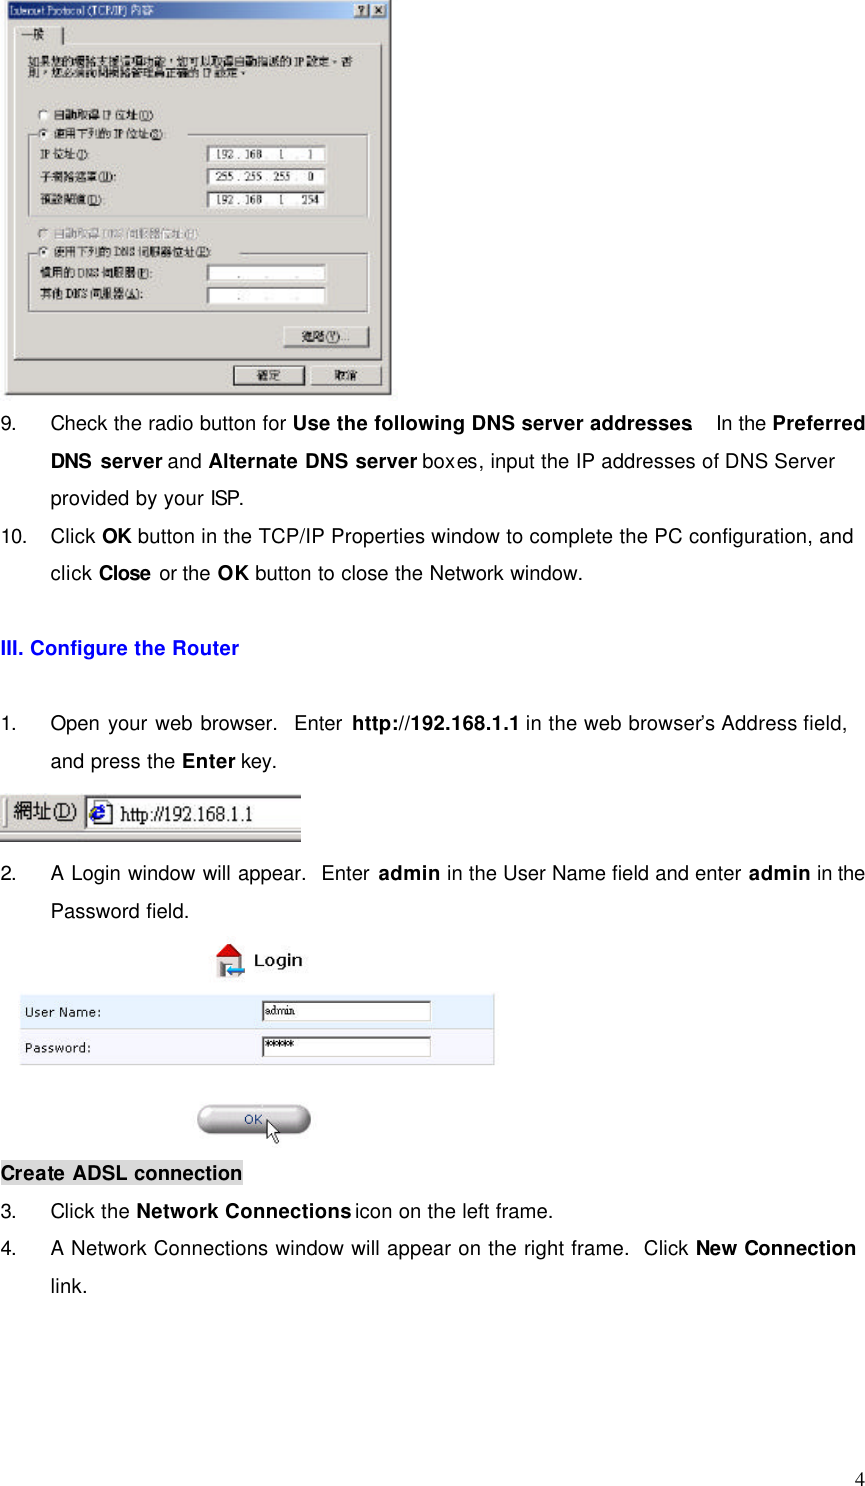  4  9. Check the radio button for Use the following DNS server addresses.  In the Preferred DNS server and Alternate DNS server boxes, input the IP addresses of DNS Server provided by your ISP. 10. Click OK button in the TCP/IP Properties window to complete the PC configuration, and click Close or the OK button to close the Network window.  III. Configure the Router  1. Open your web browser.  Enter http://192.168.1.1 in the web browser’s Address field, and press the Enter key.  2. A Login window will appear.  Enter admin in the User Name field and enter admin in the Password field.  Create ADSL connection 3. Click the Network Connections icon on the left frame. 4. A Network Connections window will appear on the right frame.  Click New Connection link.  